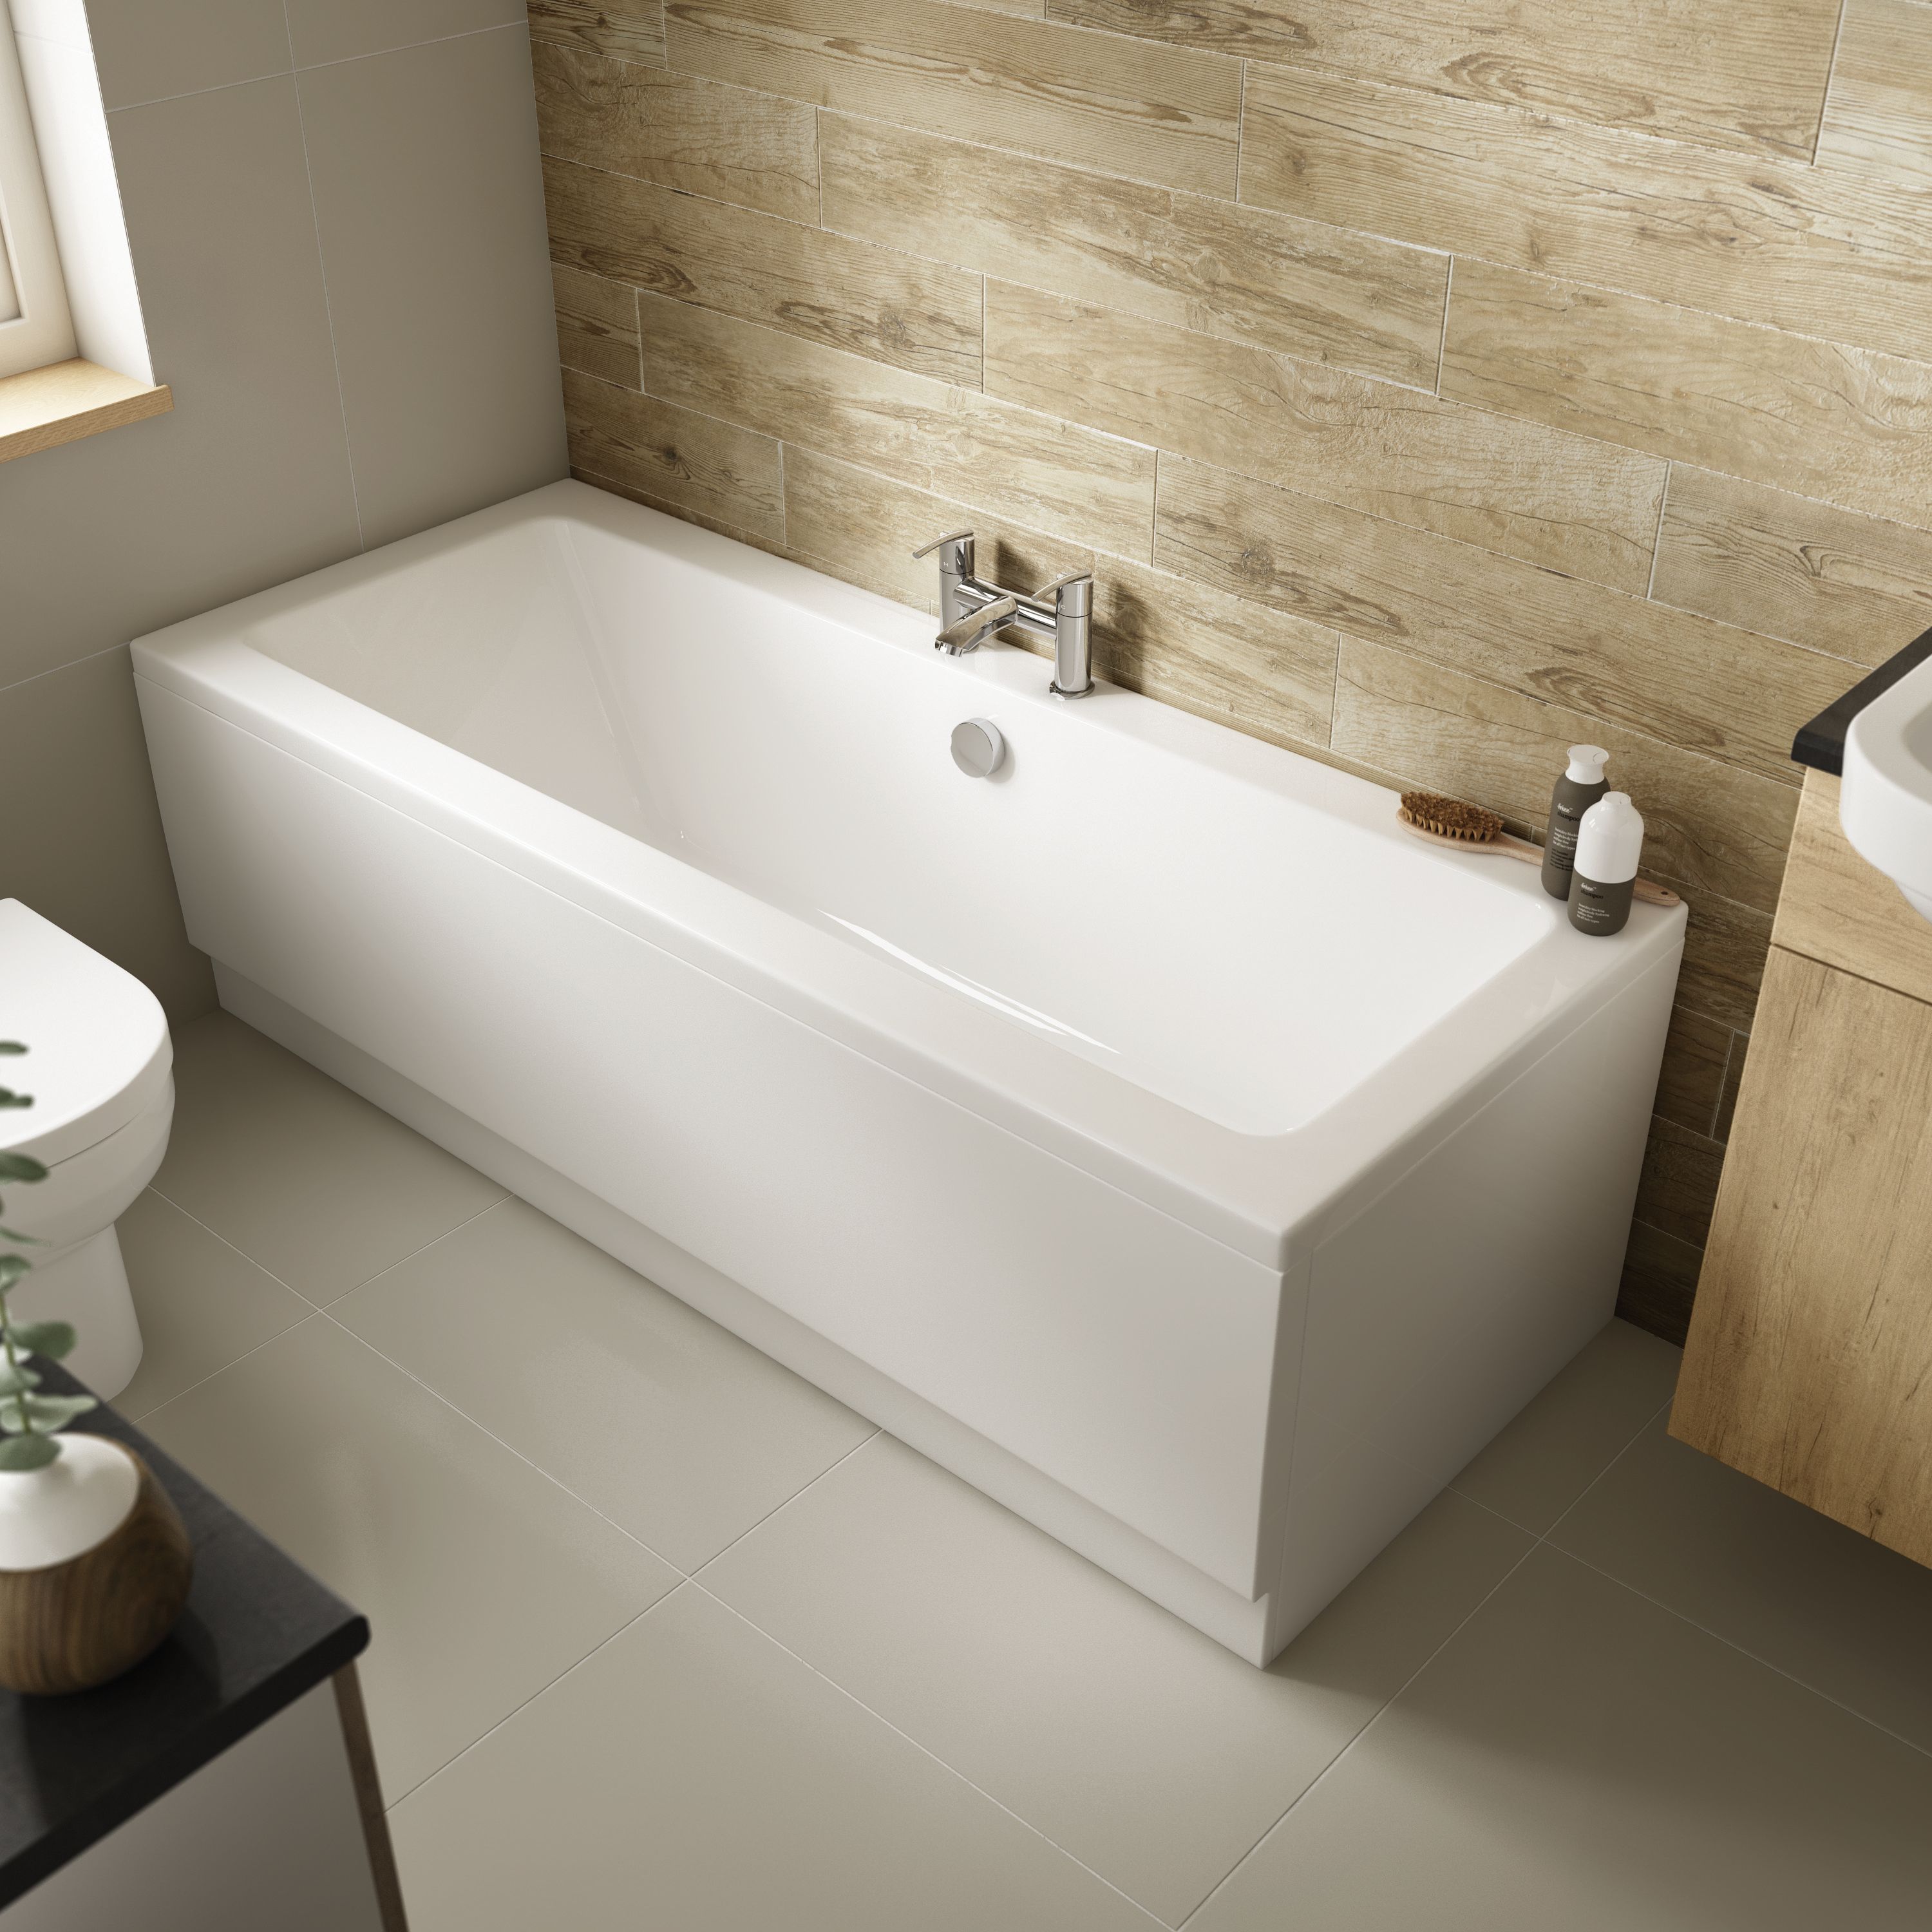 Image of Wickes Camisa Double Ended Bath - 1700 x 700mm